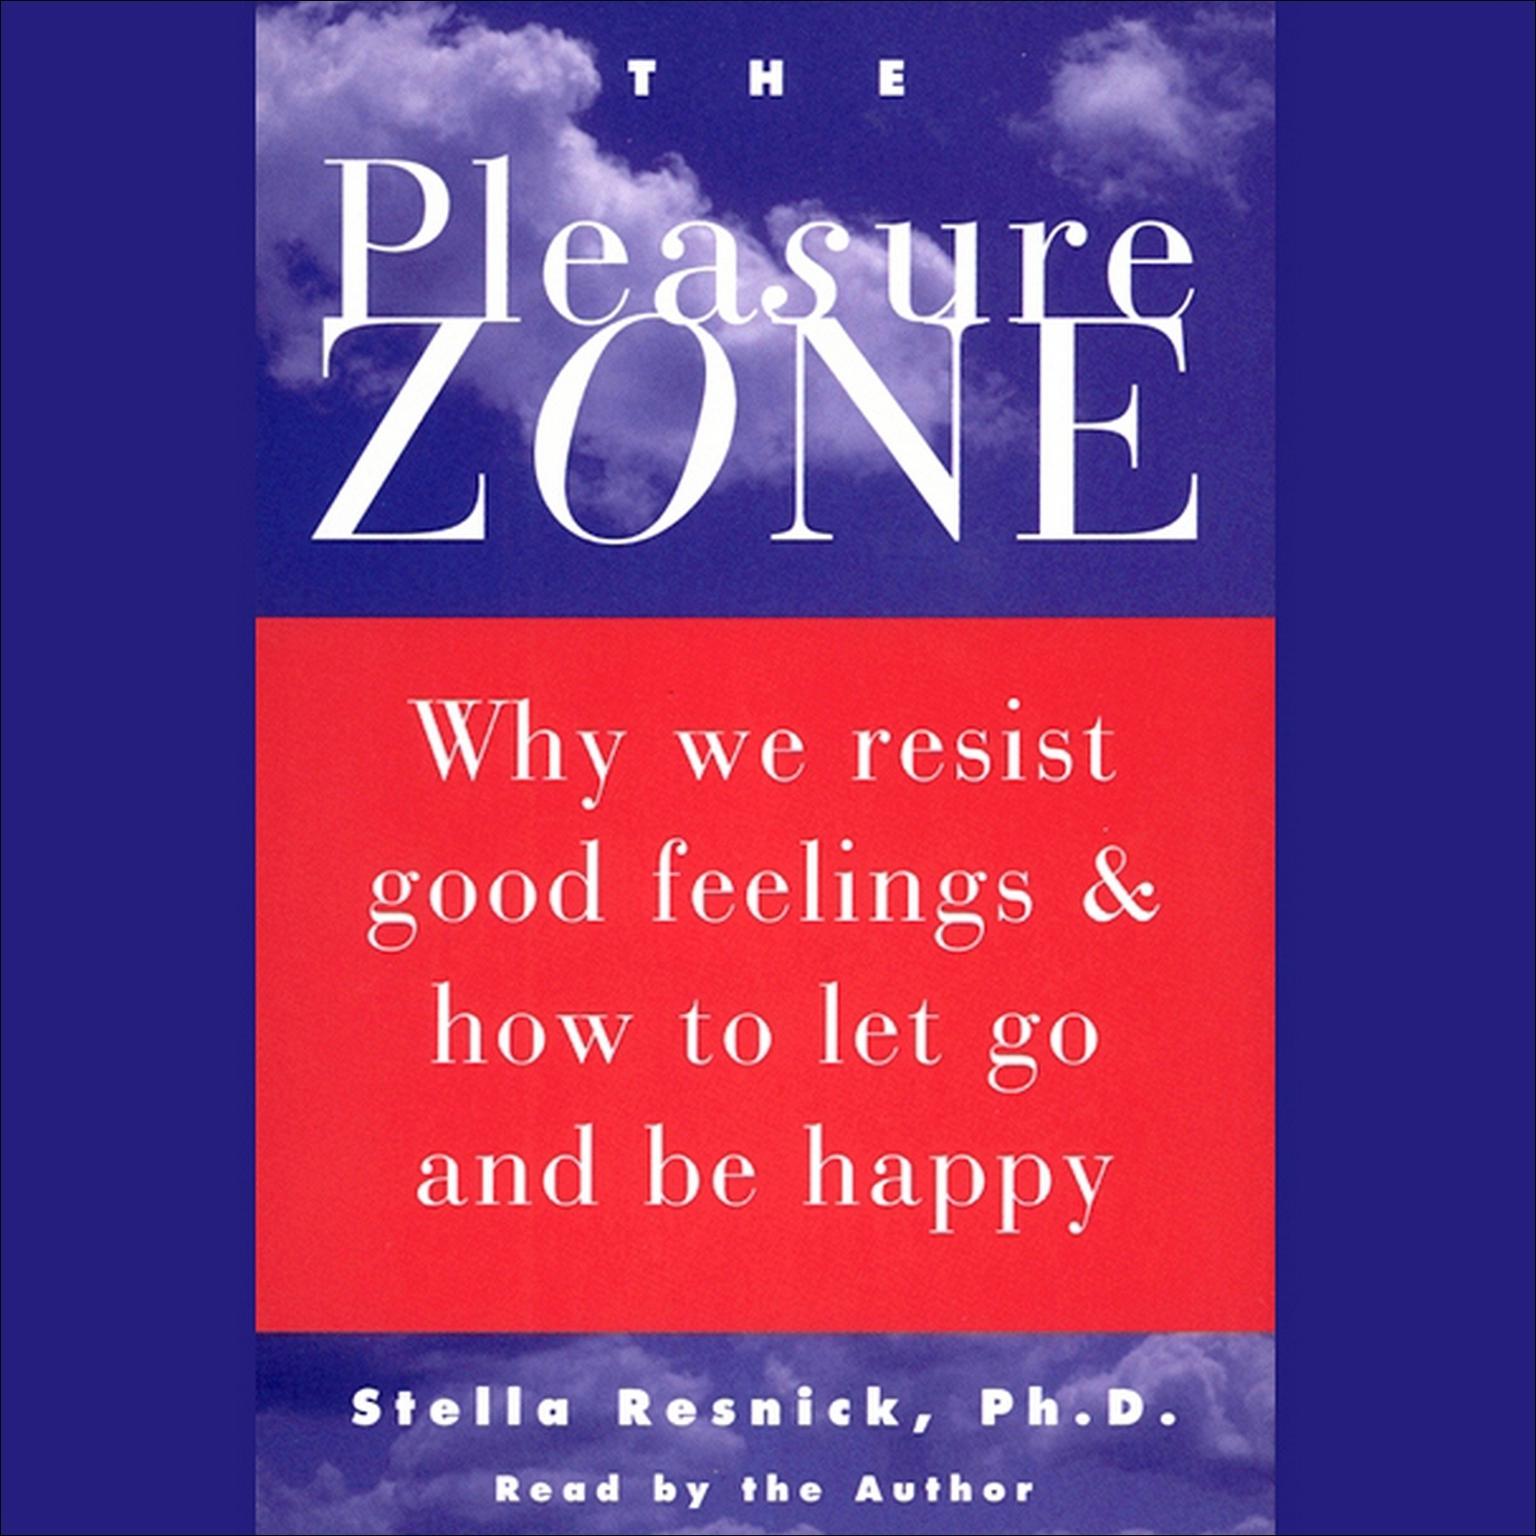 The Pleasure Zone (Abridged): Why We Resist Good Feelings & How to Let Go and Be Happy Audiobook, by Stella Resnick